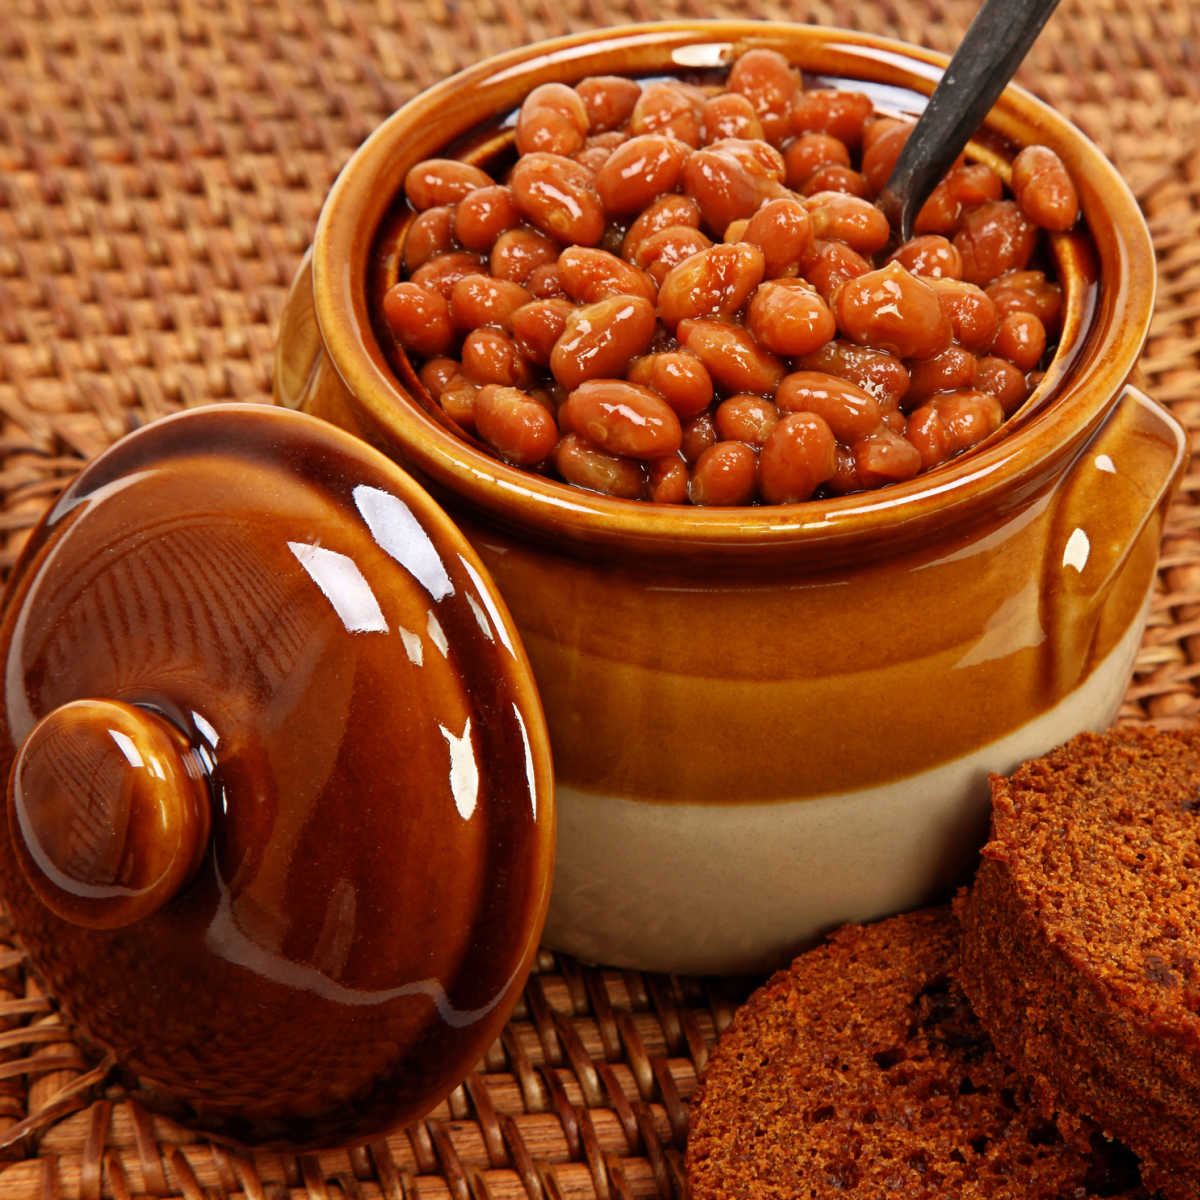 Beanpot full of Boston baked beans with cover leaning against it set on brown woven cloth